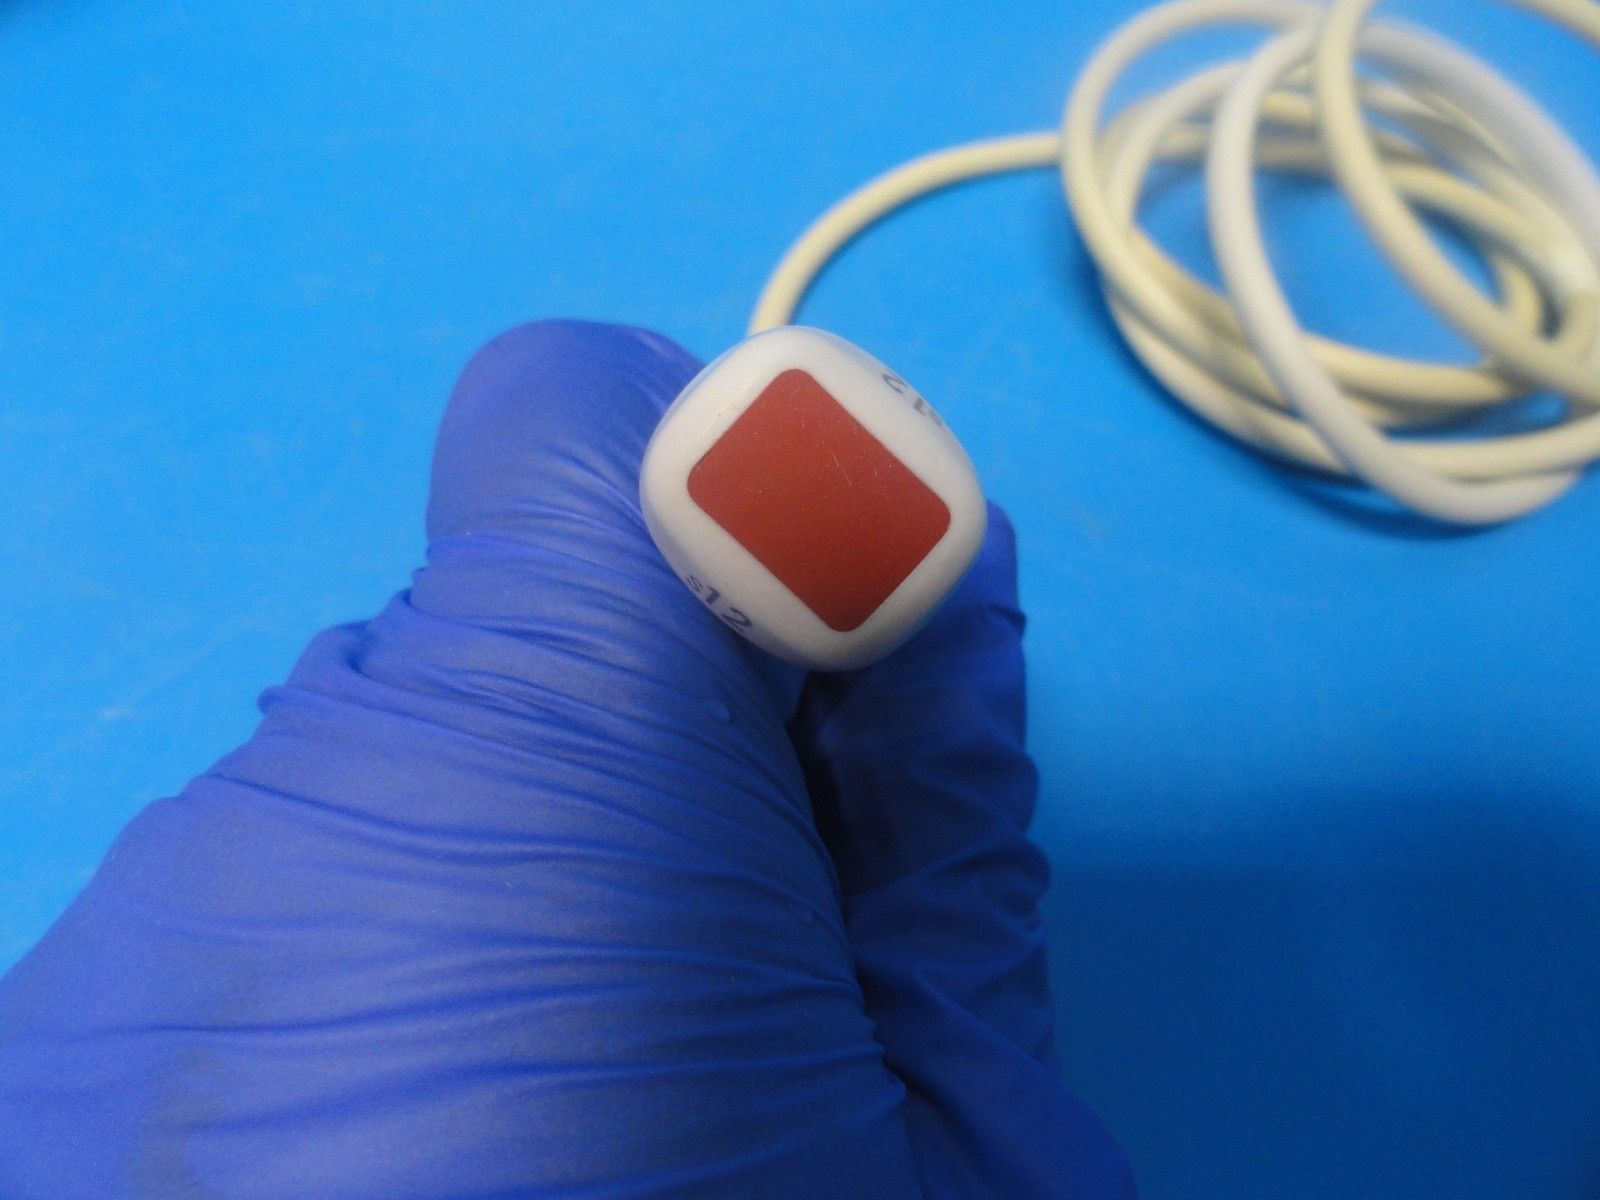 a gloved hand holding a red and white button